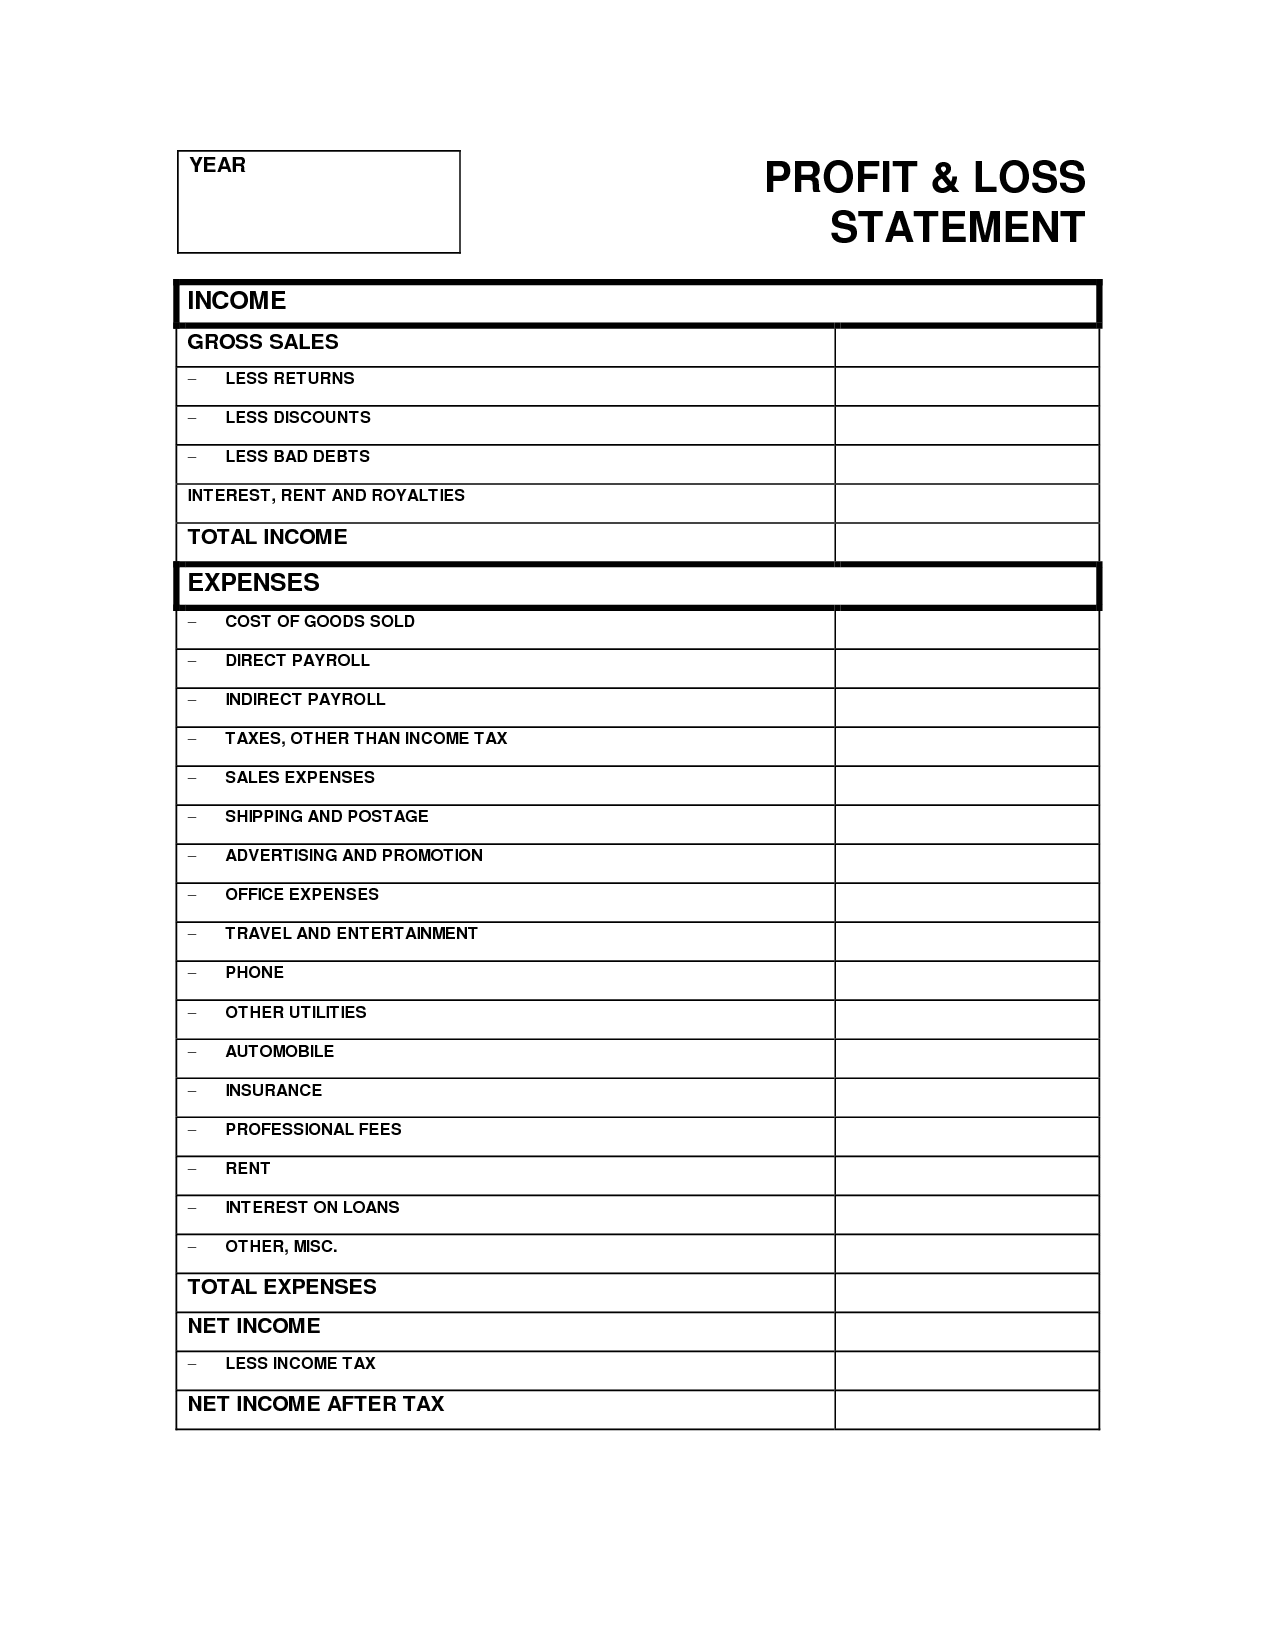 printable blank profit and loss statement   Ecza.solinf.co